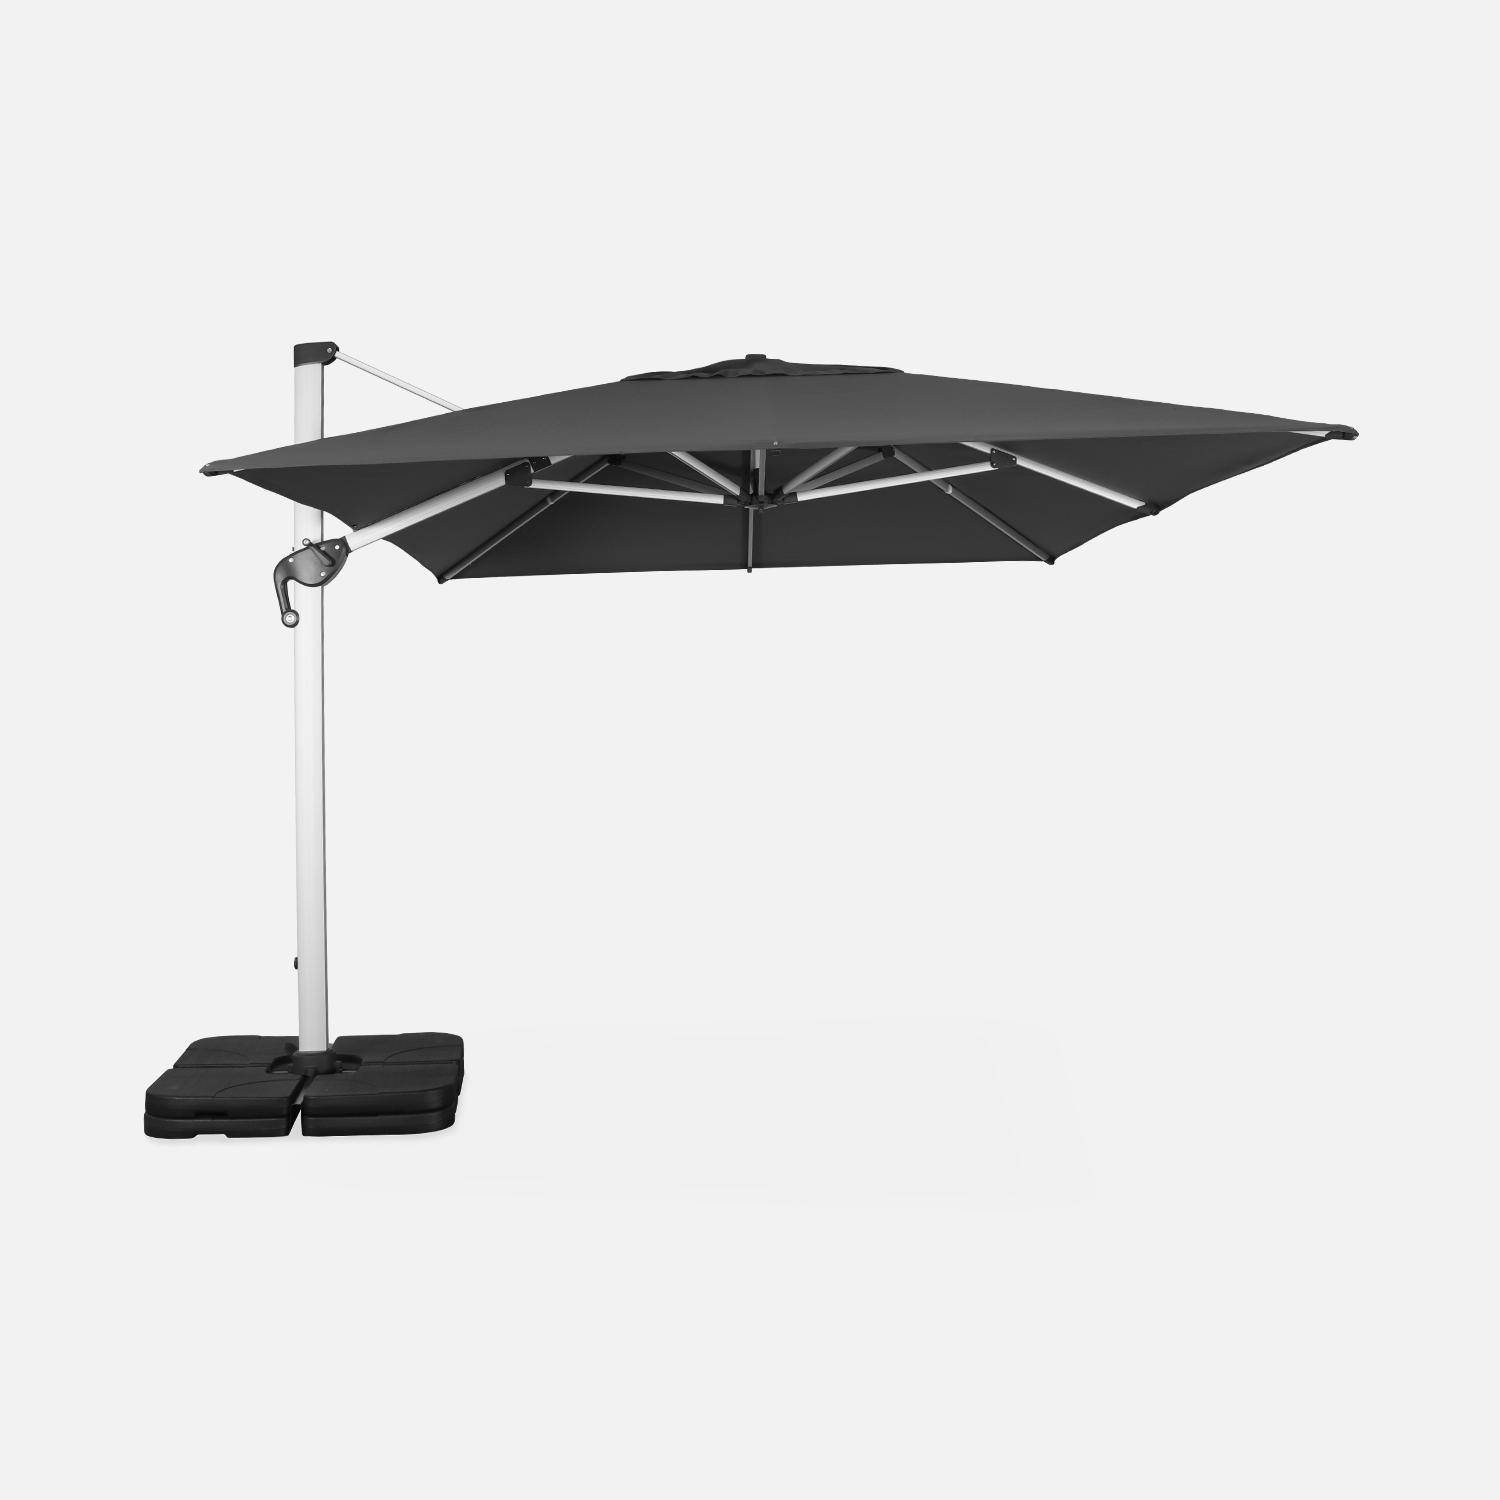 Premium quality, 4x4m square parasol - PYLA Anthracite grey - European Agora canopy, anodised aluminium stand, rotating, protective dust cover,sweeek,Photo2